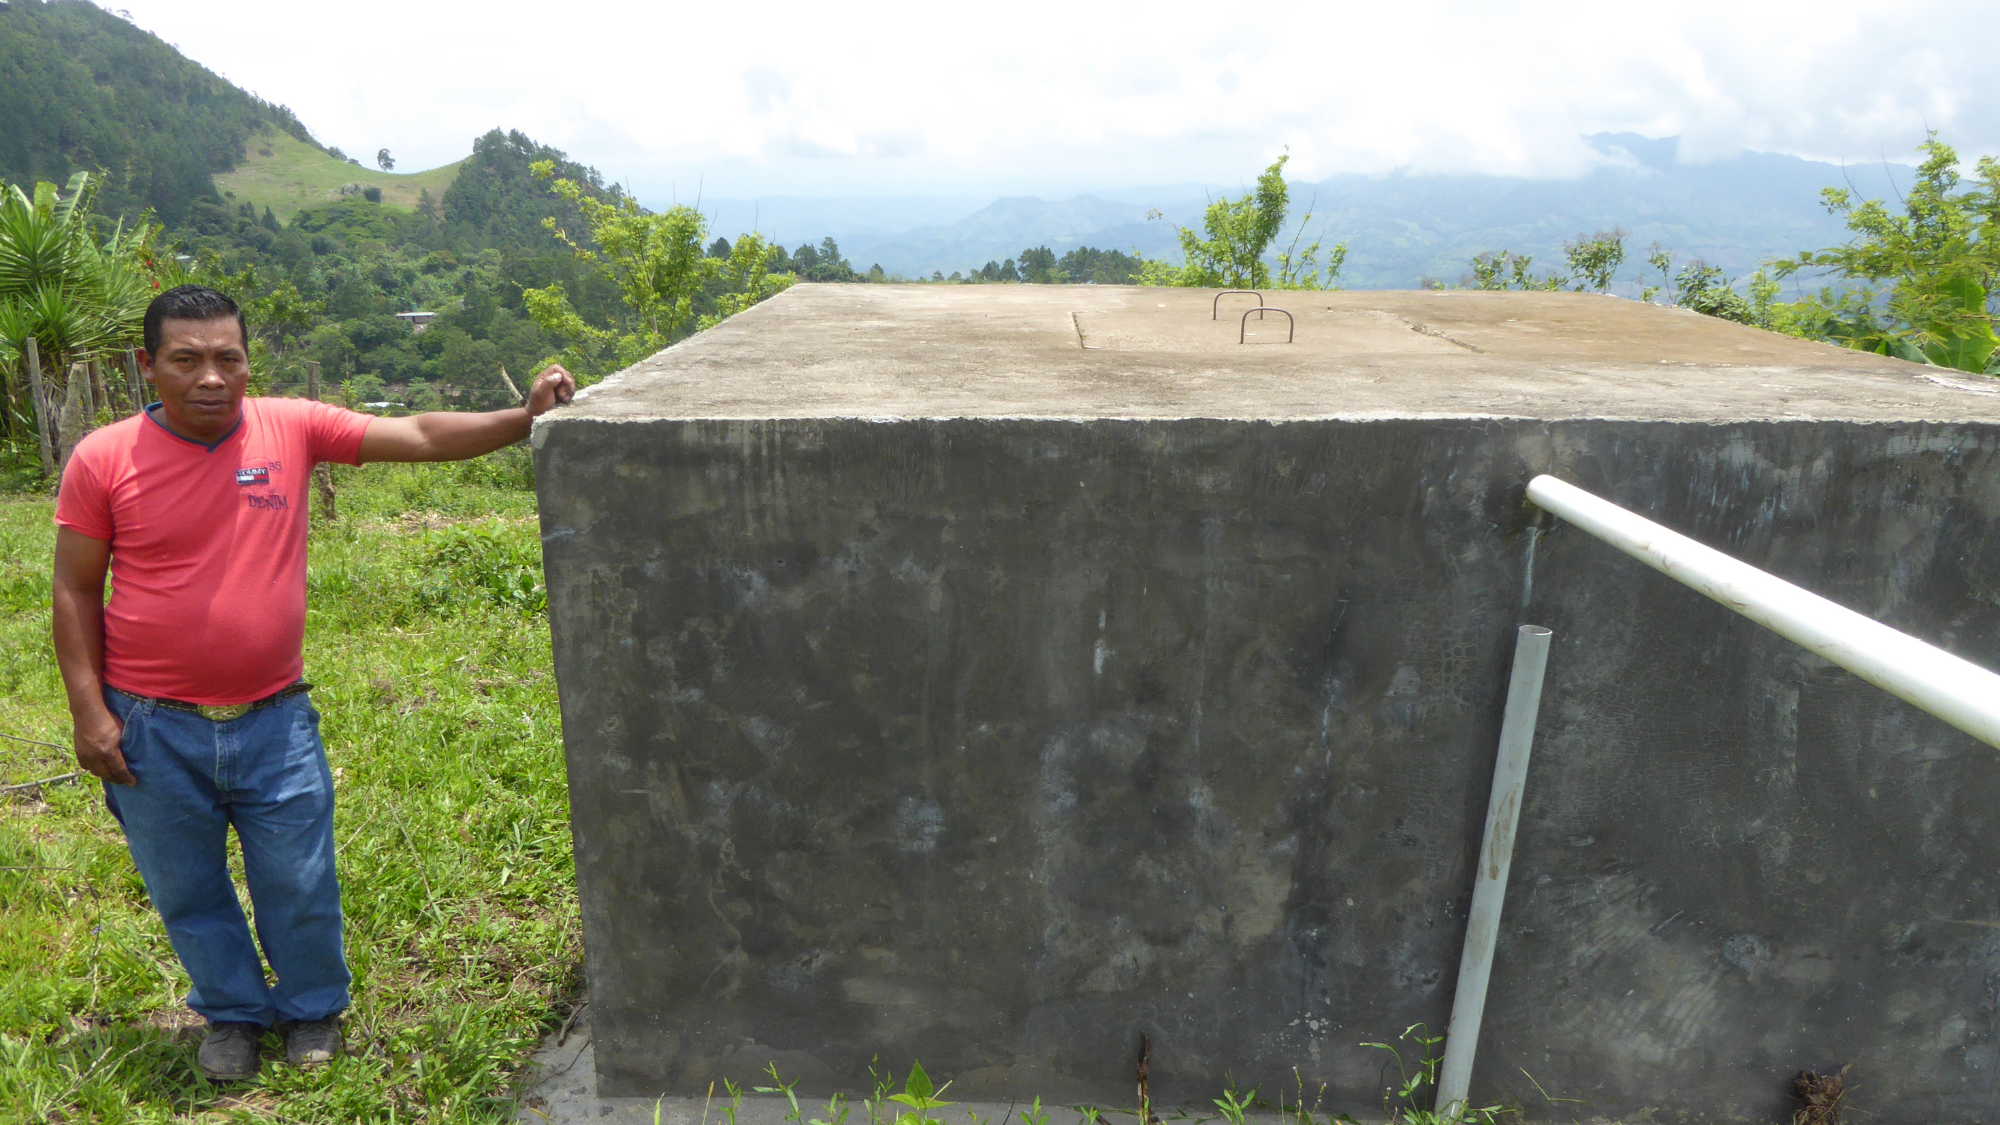 Person standing next to water tank